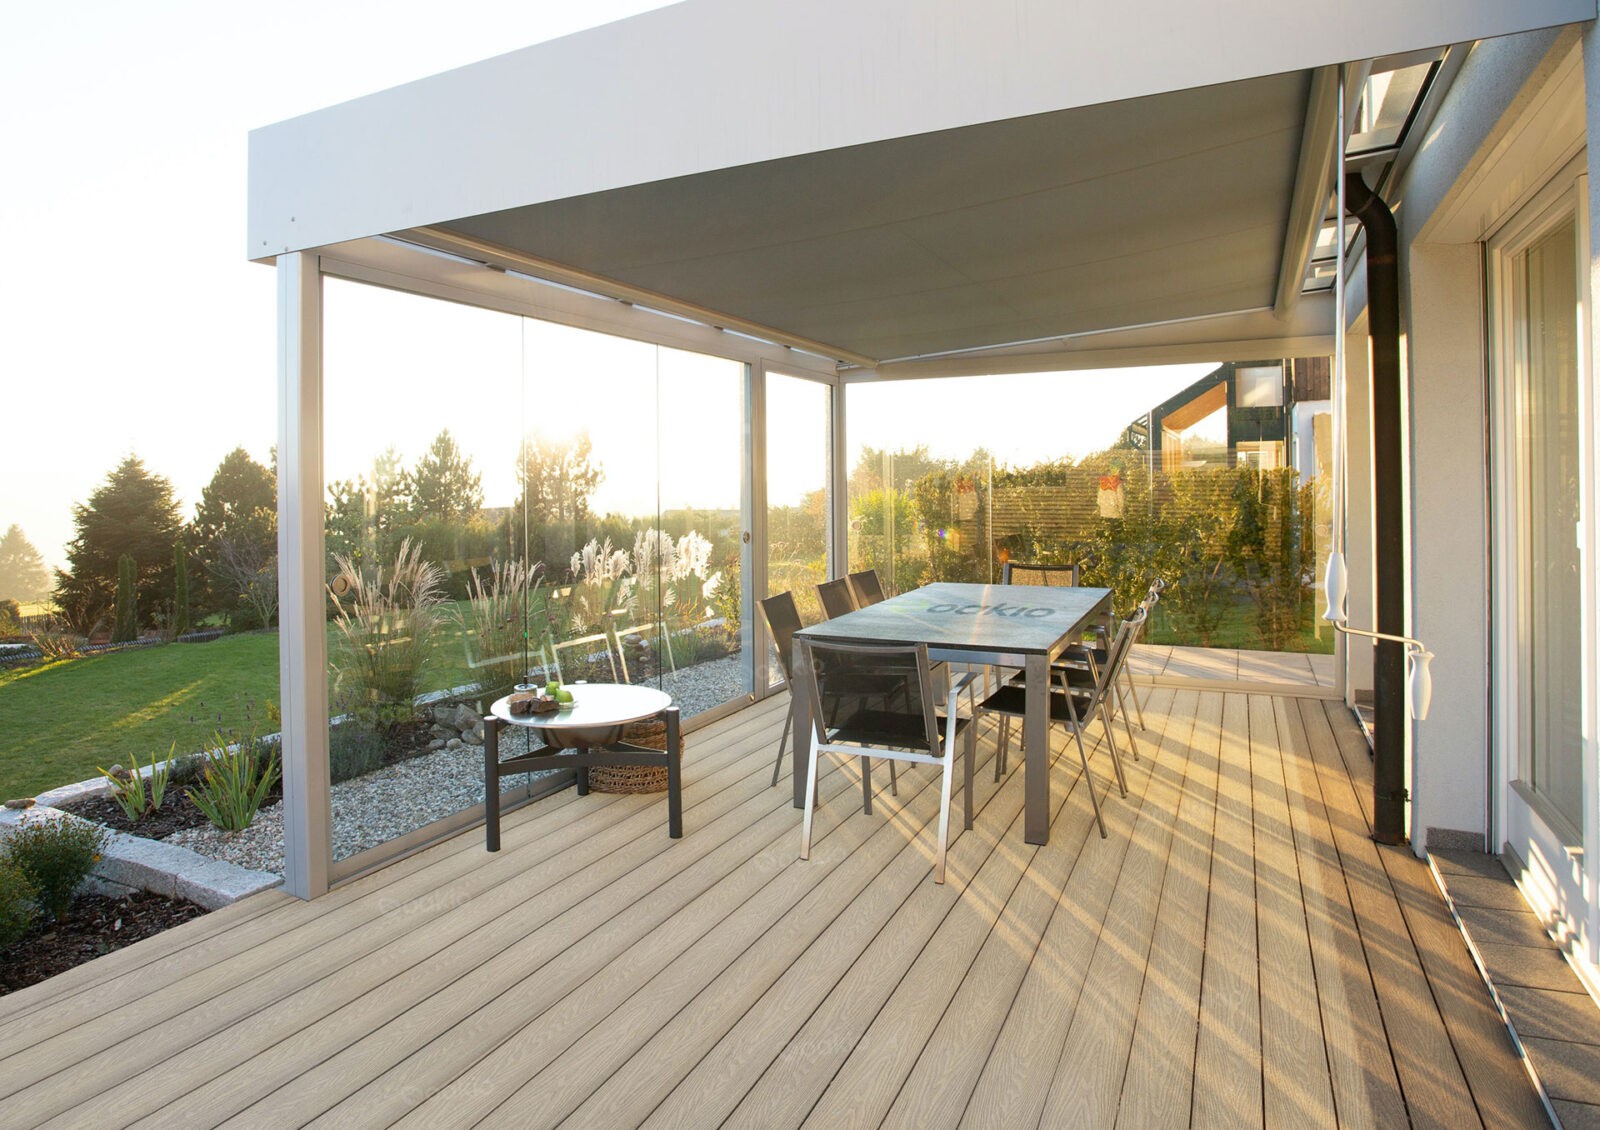 A modern deck with a set of chairs and tables for al-fresco dining